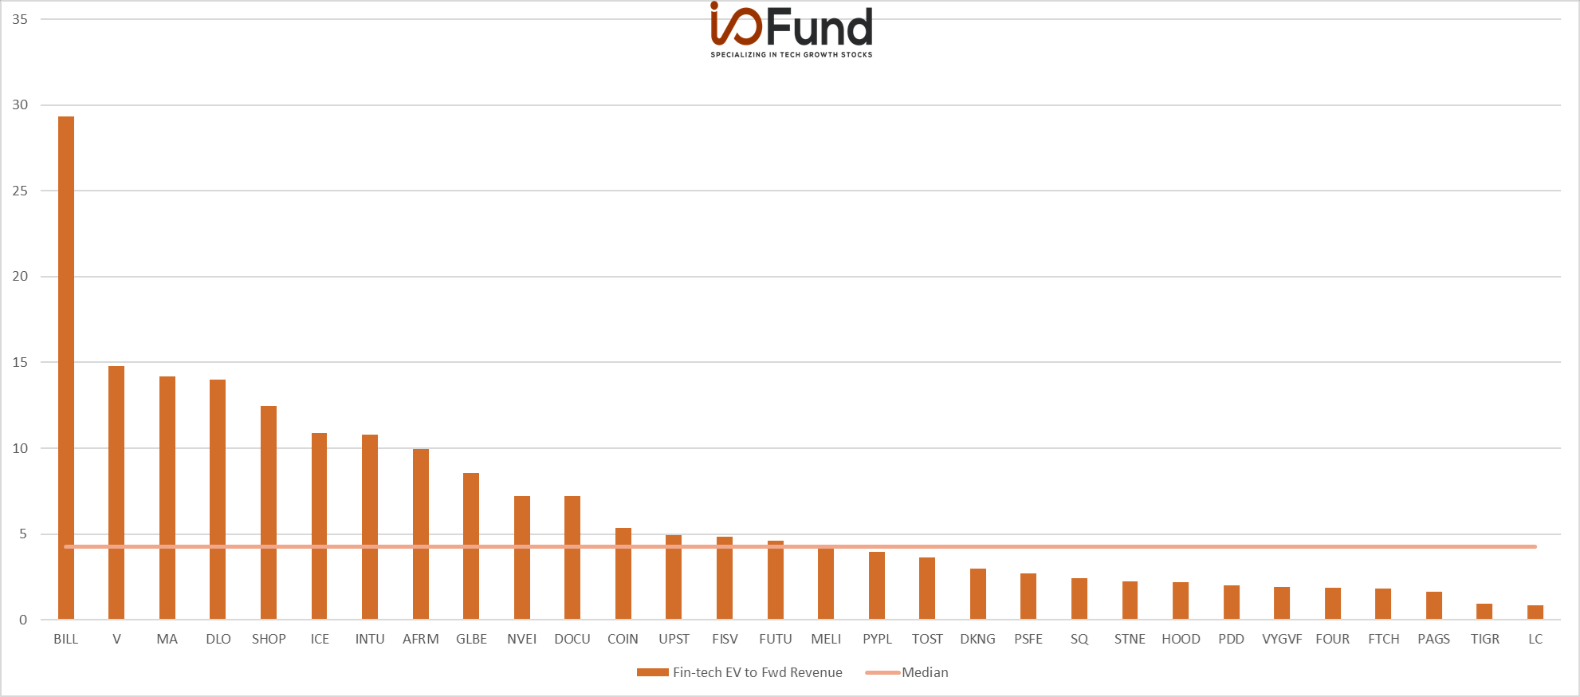 https://images.prismic.io/bethtechnology/8799f98c-afac-4558-8552-1bfa00b8e90a_io-fund-fintech-q4-2021-earnings-overview-top-ev-fwd-sales.png?auto=compress,format